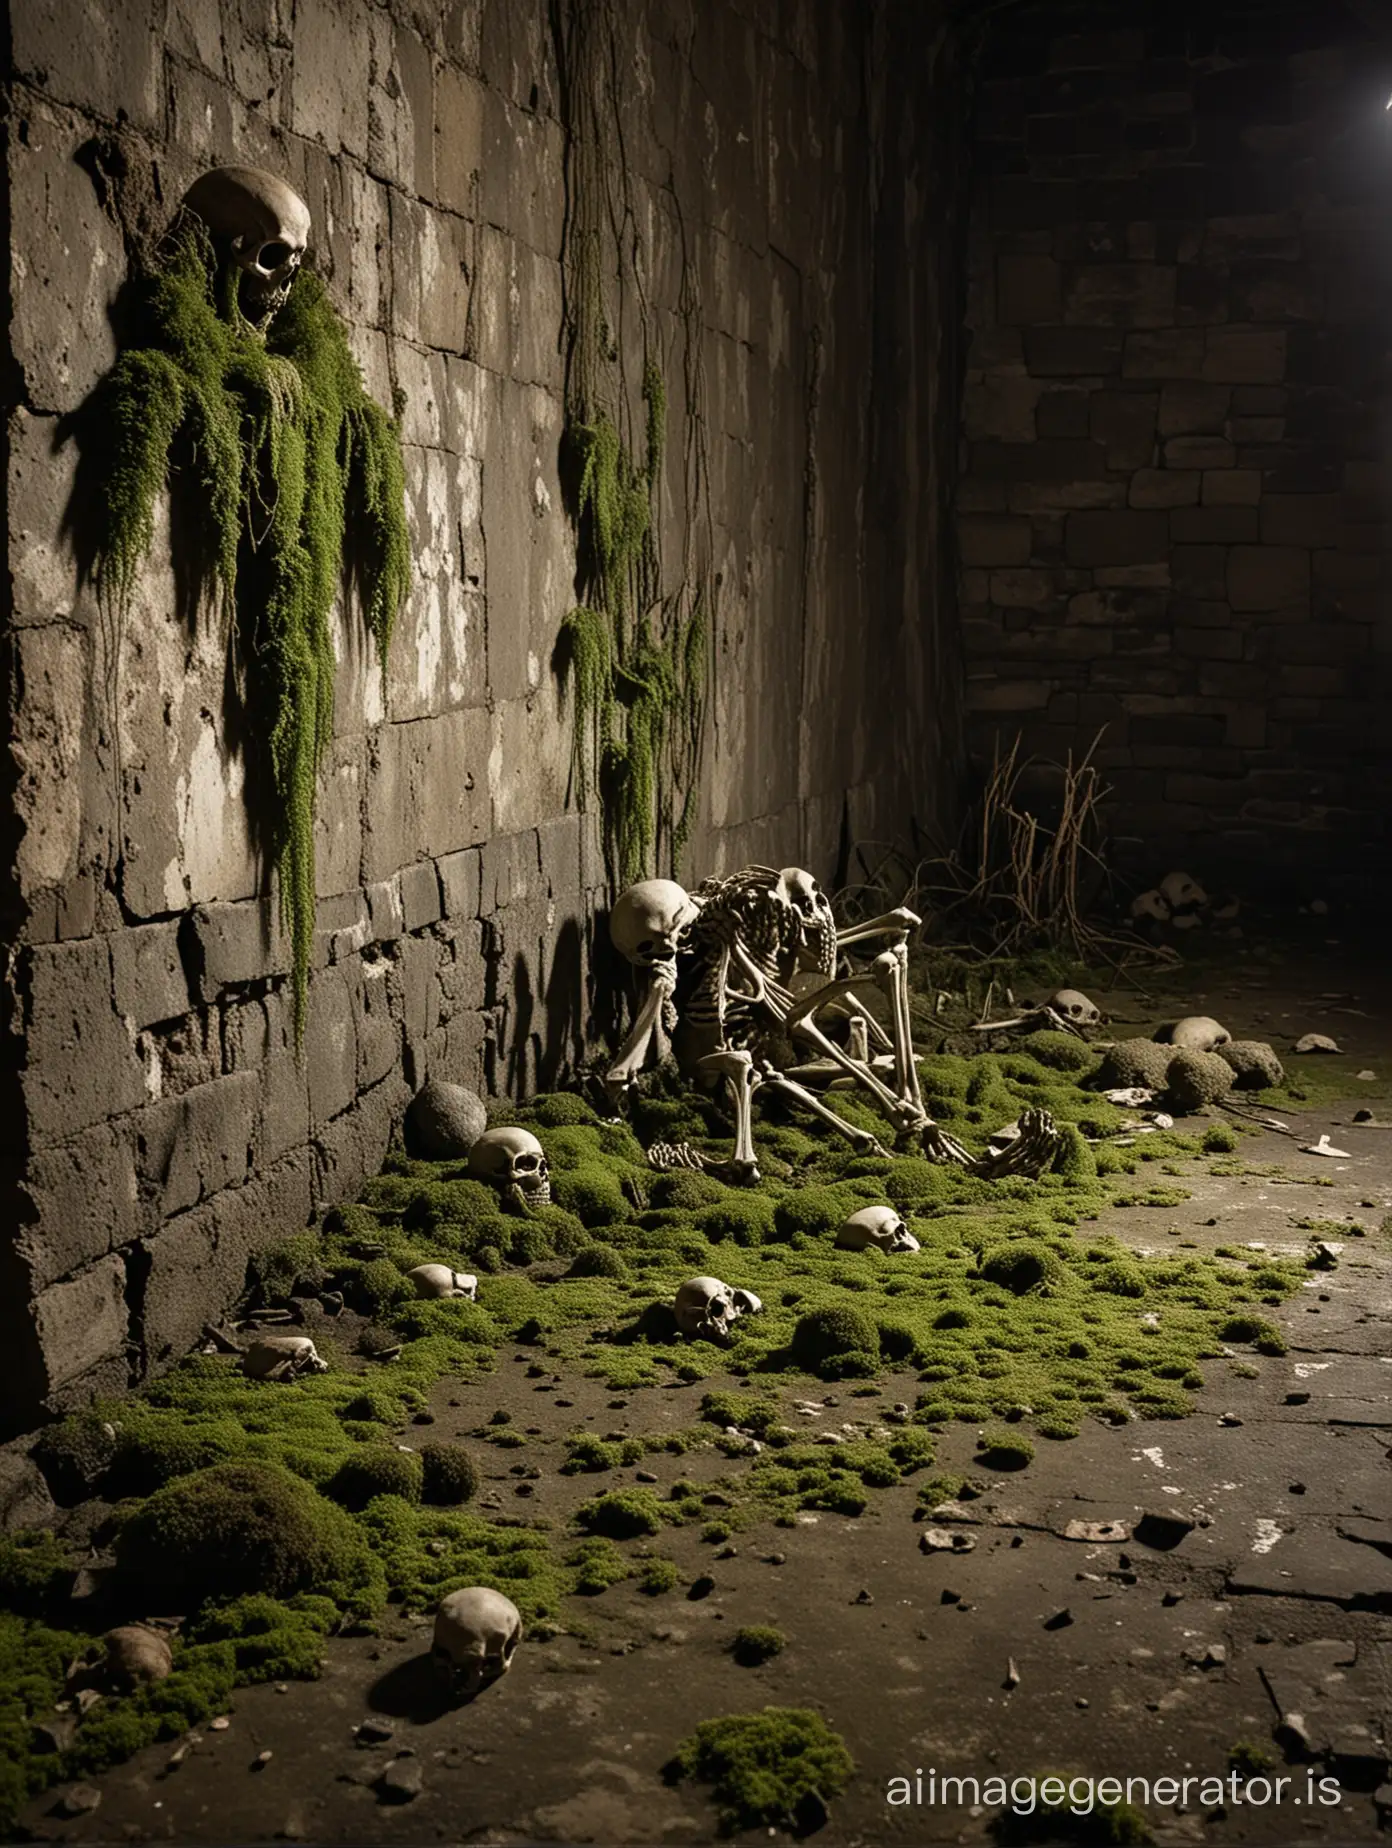 Sinister-Monsters-Concealed-in-Ancient-Dungeon-with-Decaying-Skeletons